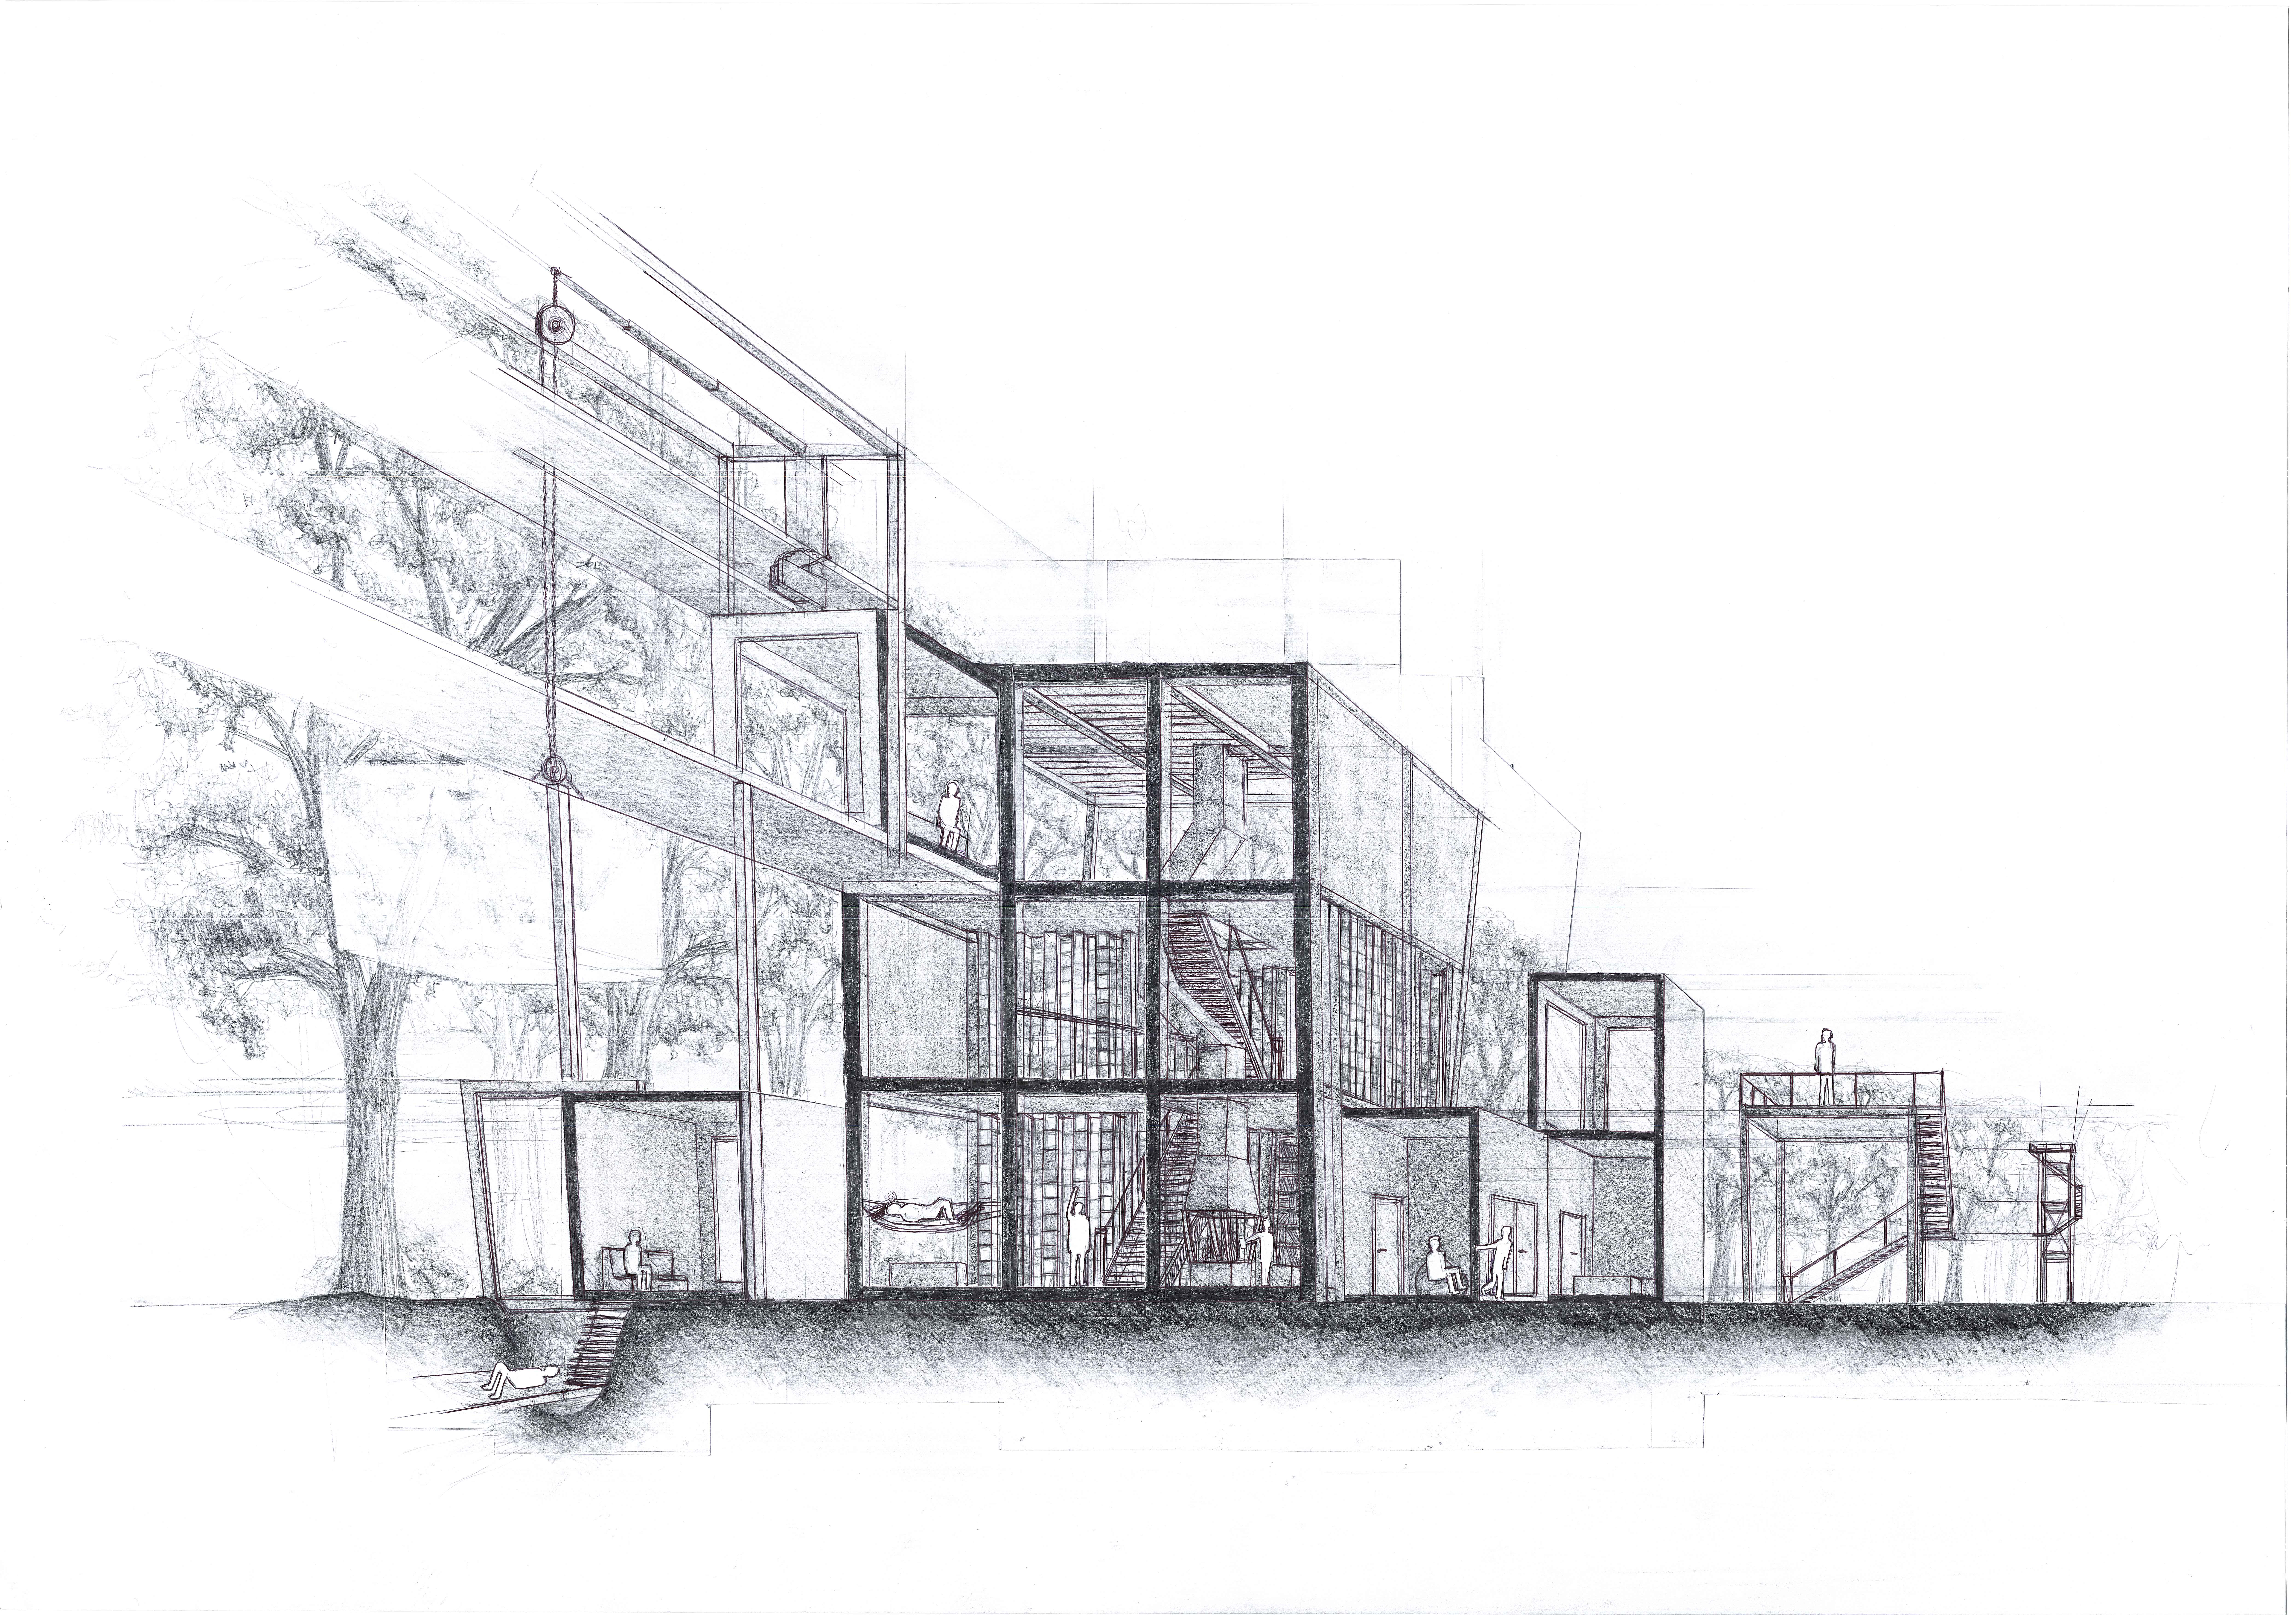 Architecture Drawings